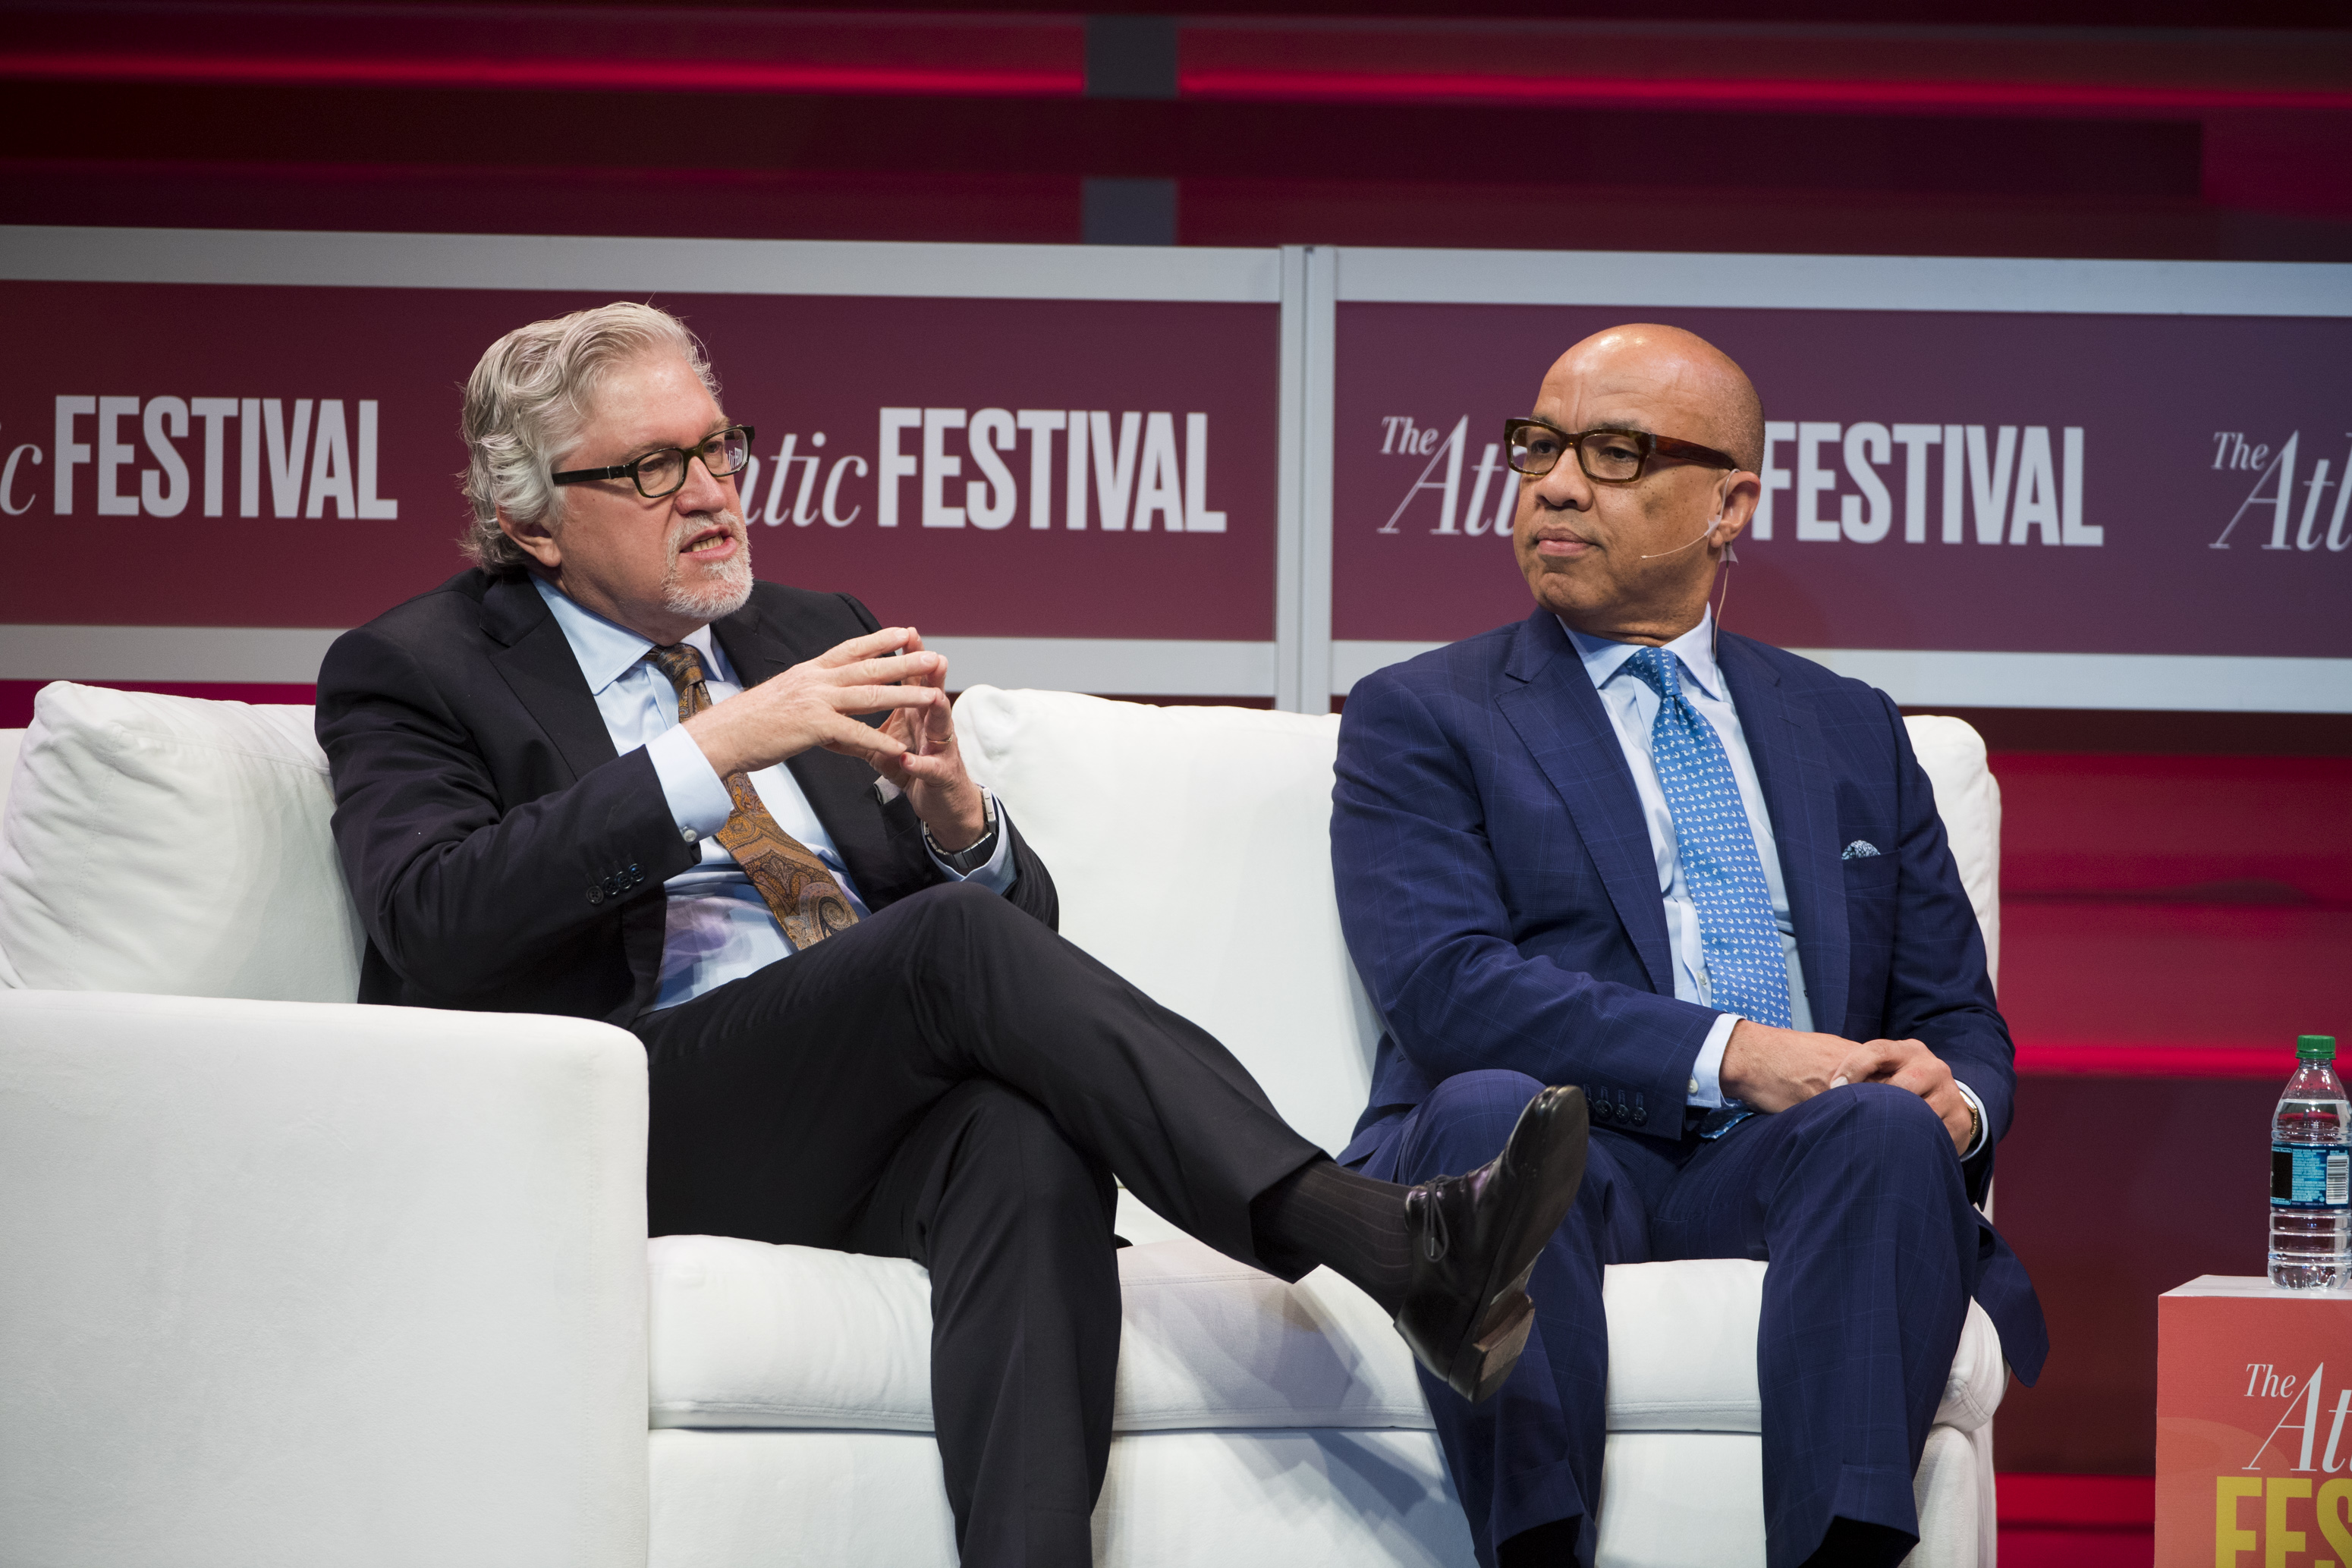 Jeff Raikes and Ford Foundation president Darren Walker discuss racial equity at the Atlantic Festival.